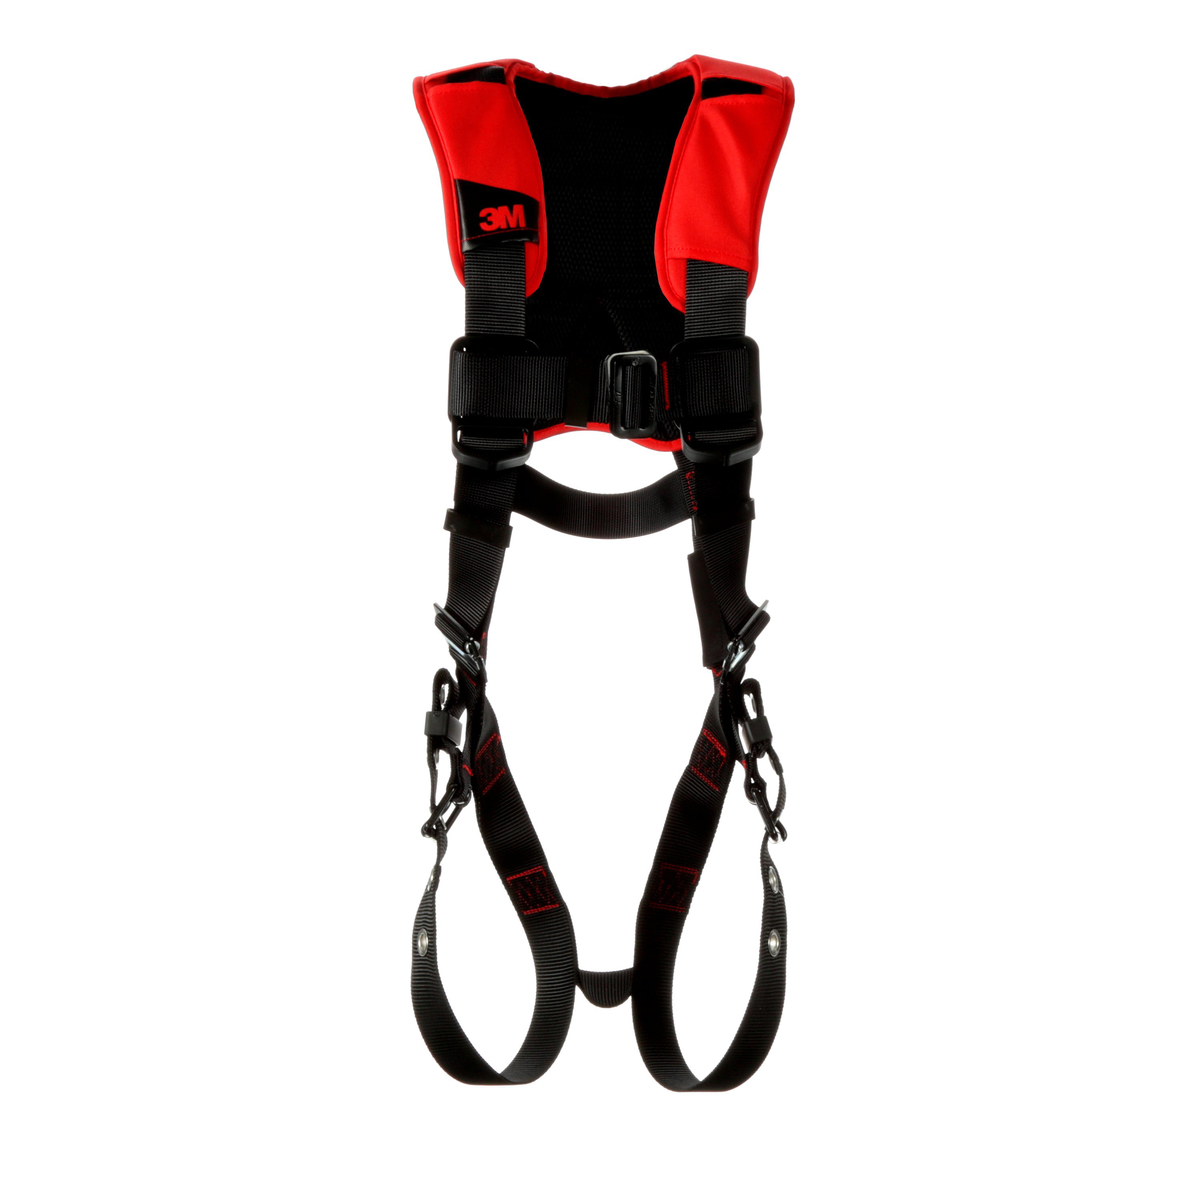 3M™ Protecta® Small Comfort Vest-Style Full Body Harness With Auto-Resetting Lanyard Keeper And Impact Indicator